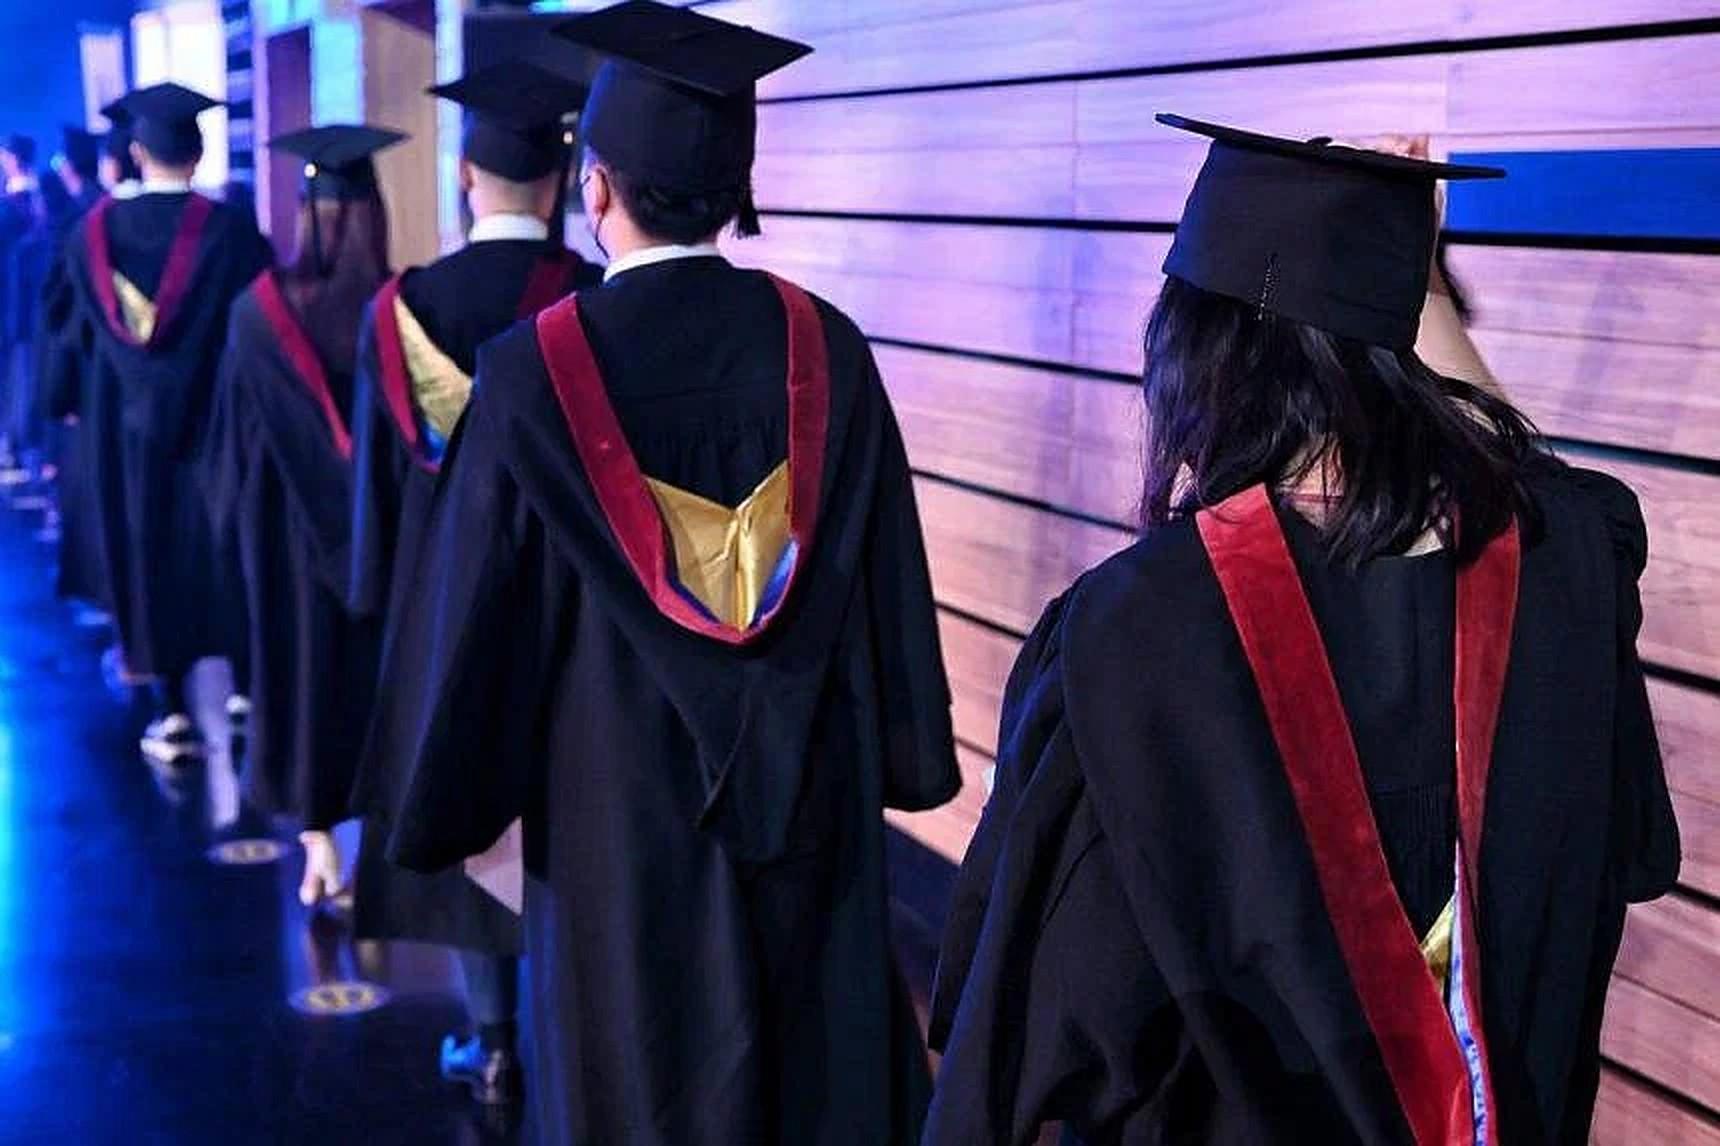 SMU graduates from 2025 to get transcript of CCA and skills learnt